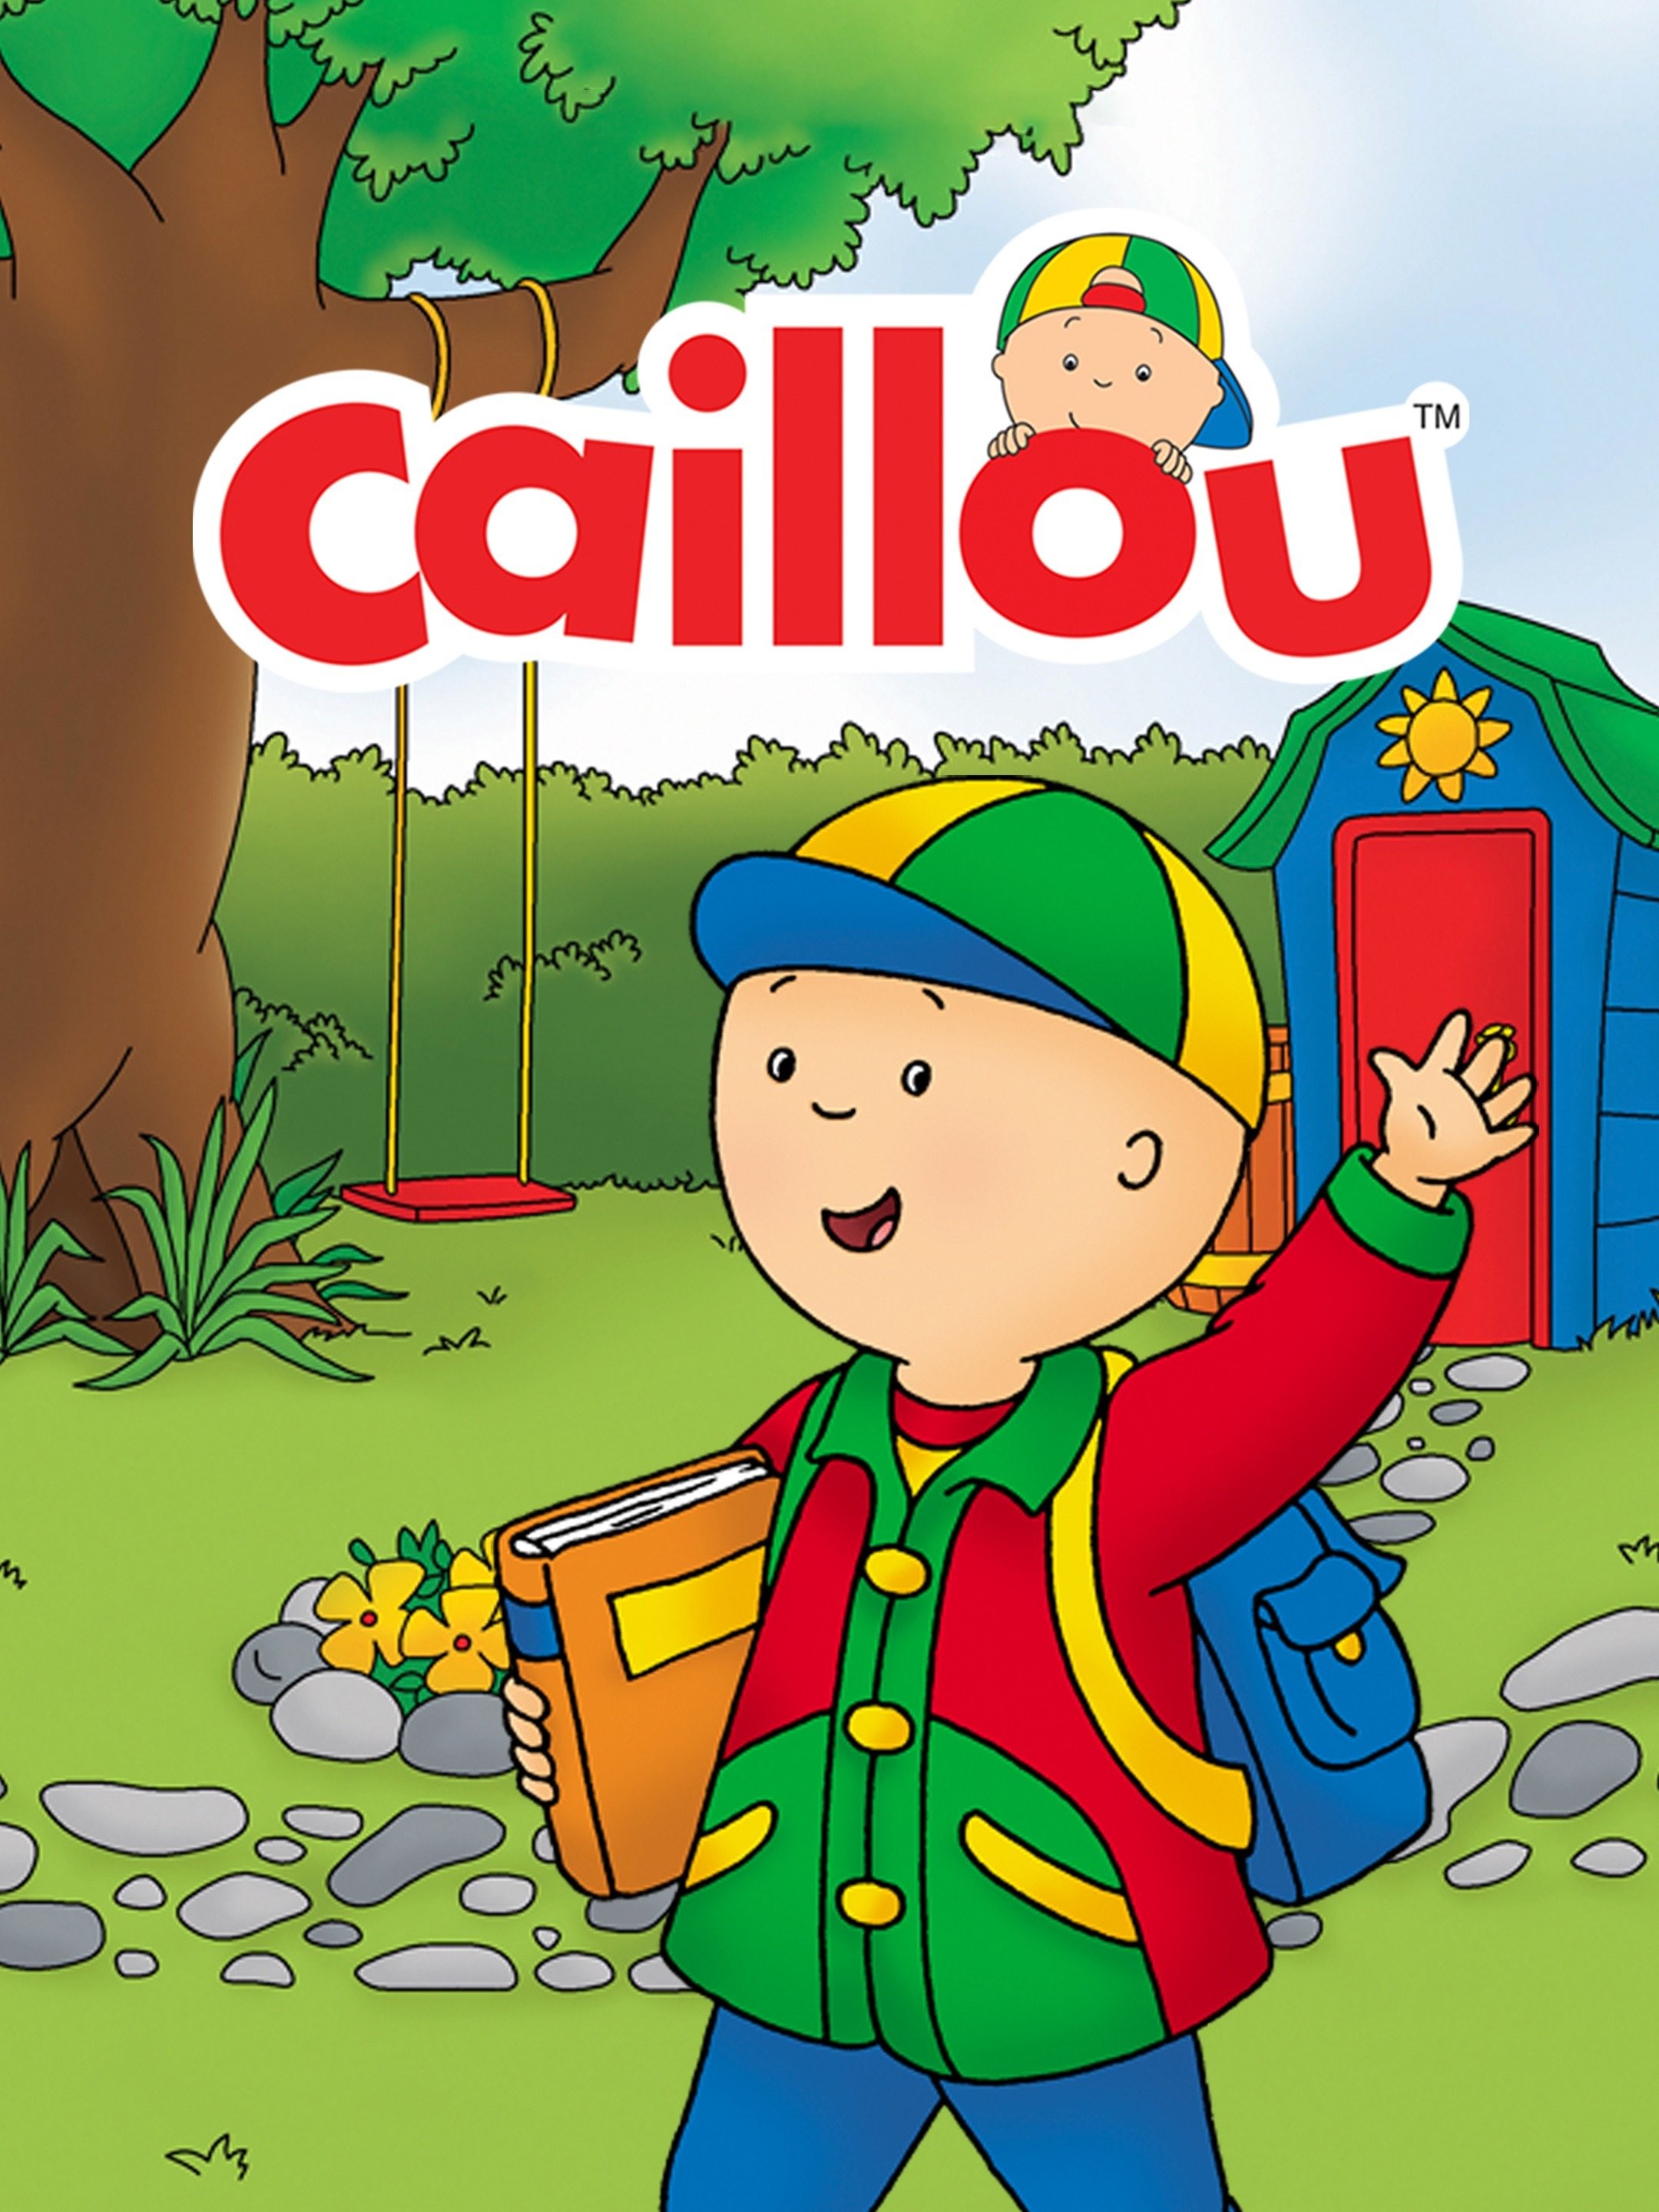 Caillou's Perfect Christmas!': Watch The Exclusive Trailer